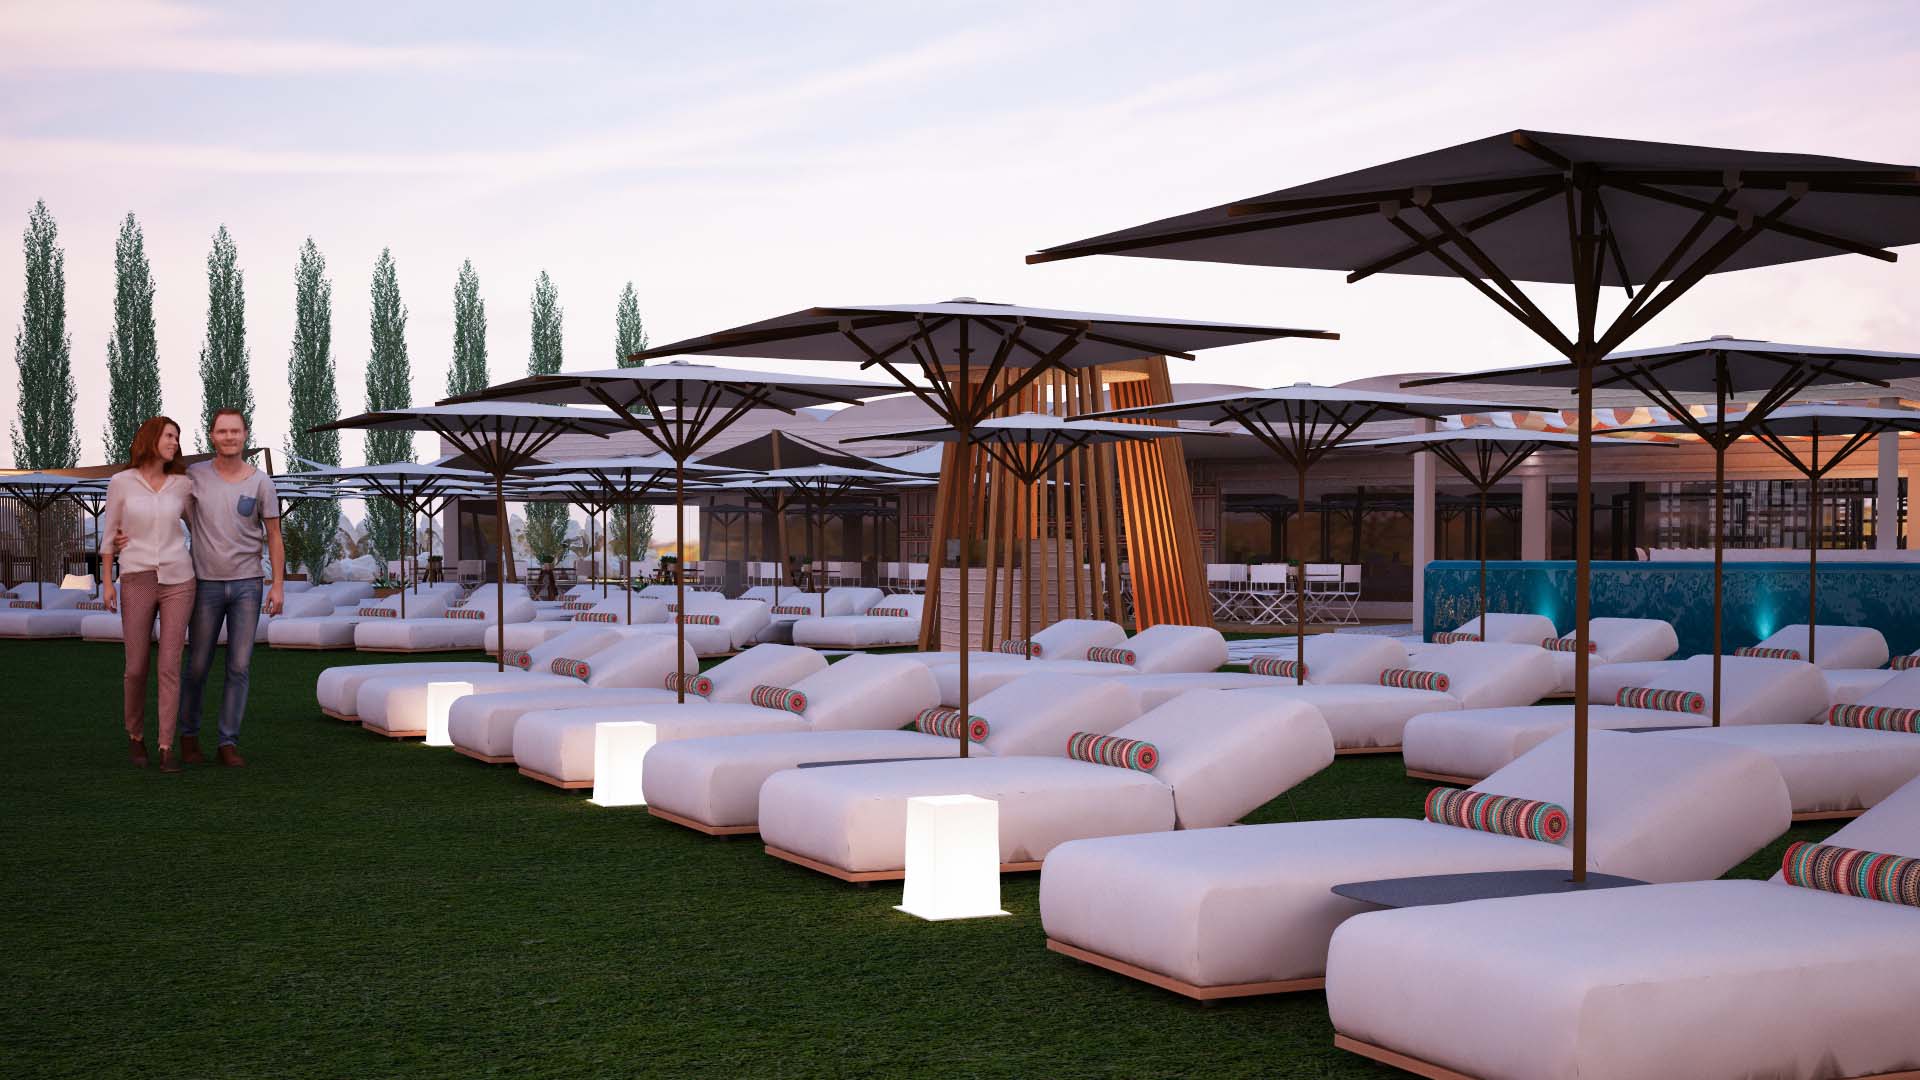 iCONSULT - Commercial Project - Gazebo Mare Beach Bar